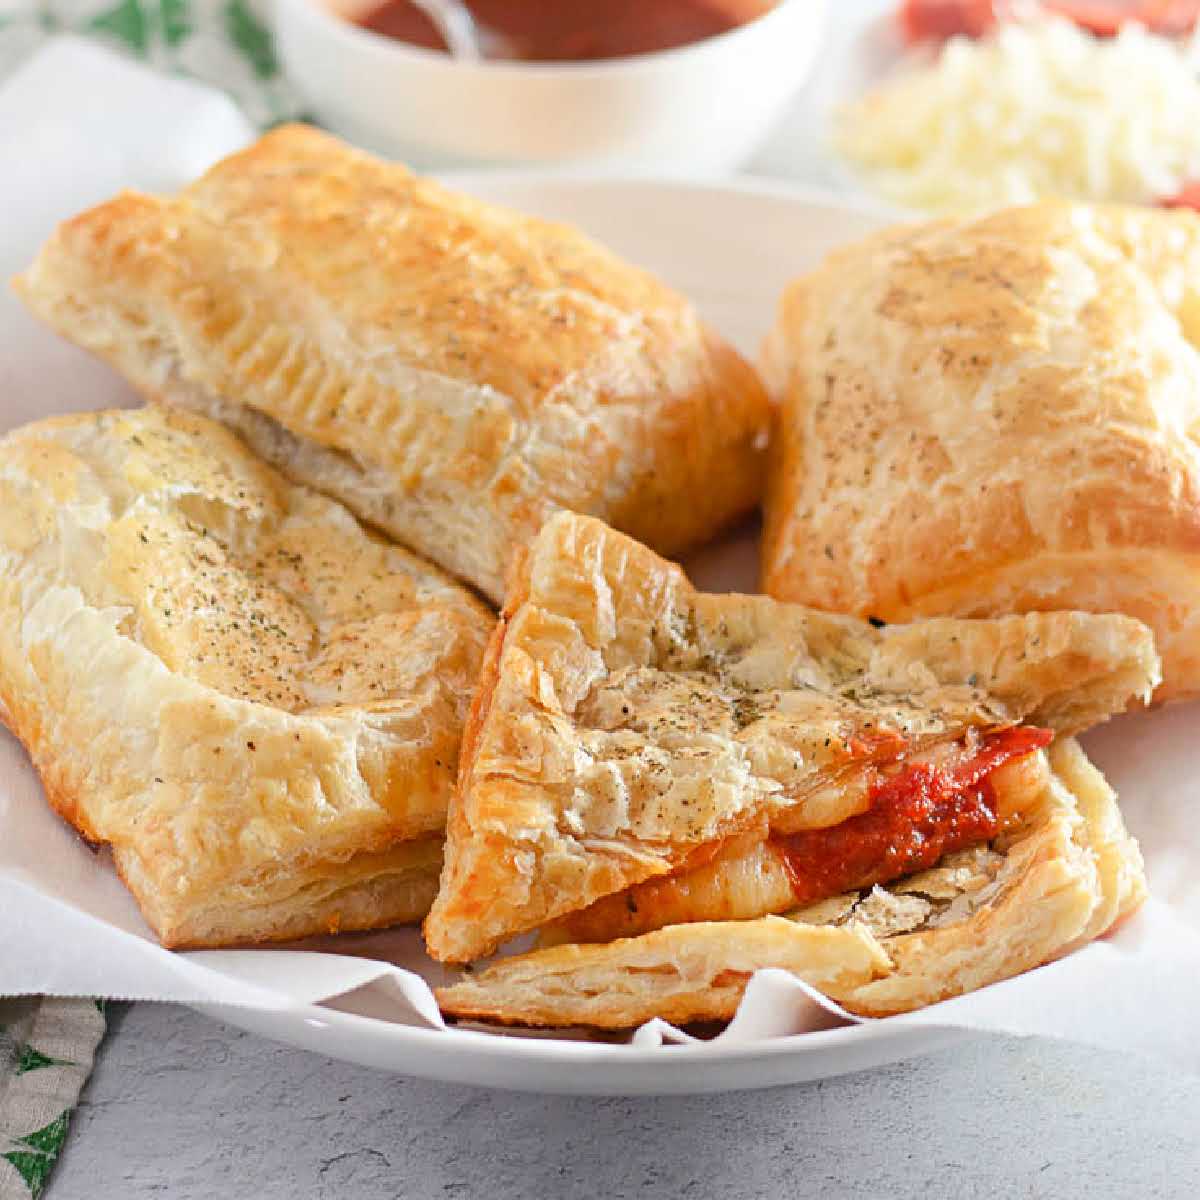 Pulled Pork Pastry Puffs - Football Friday - Plain Chicken